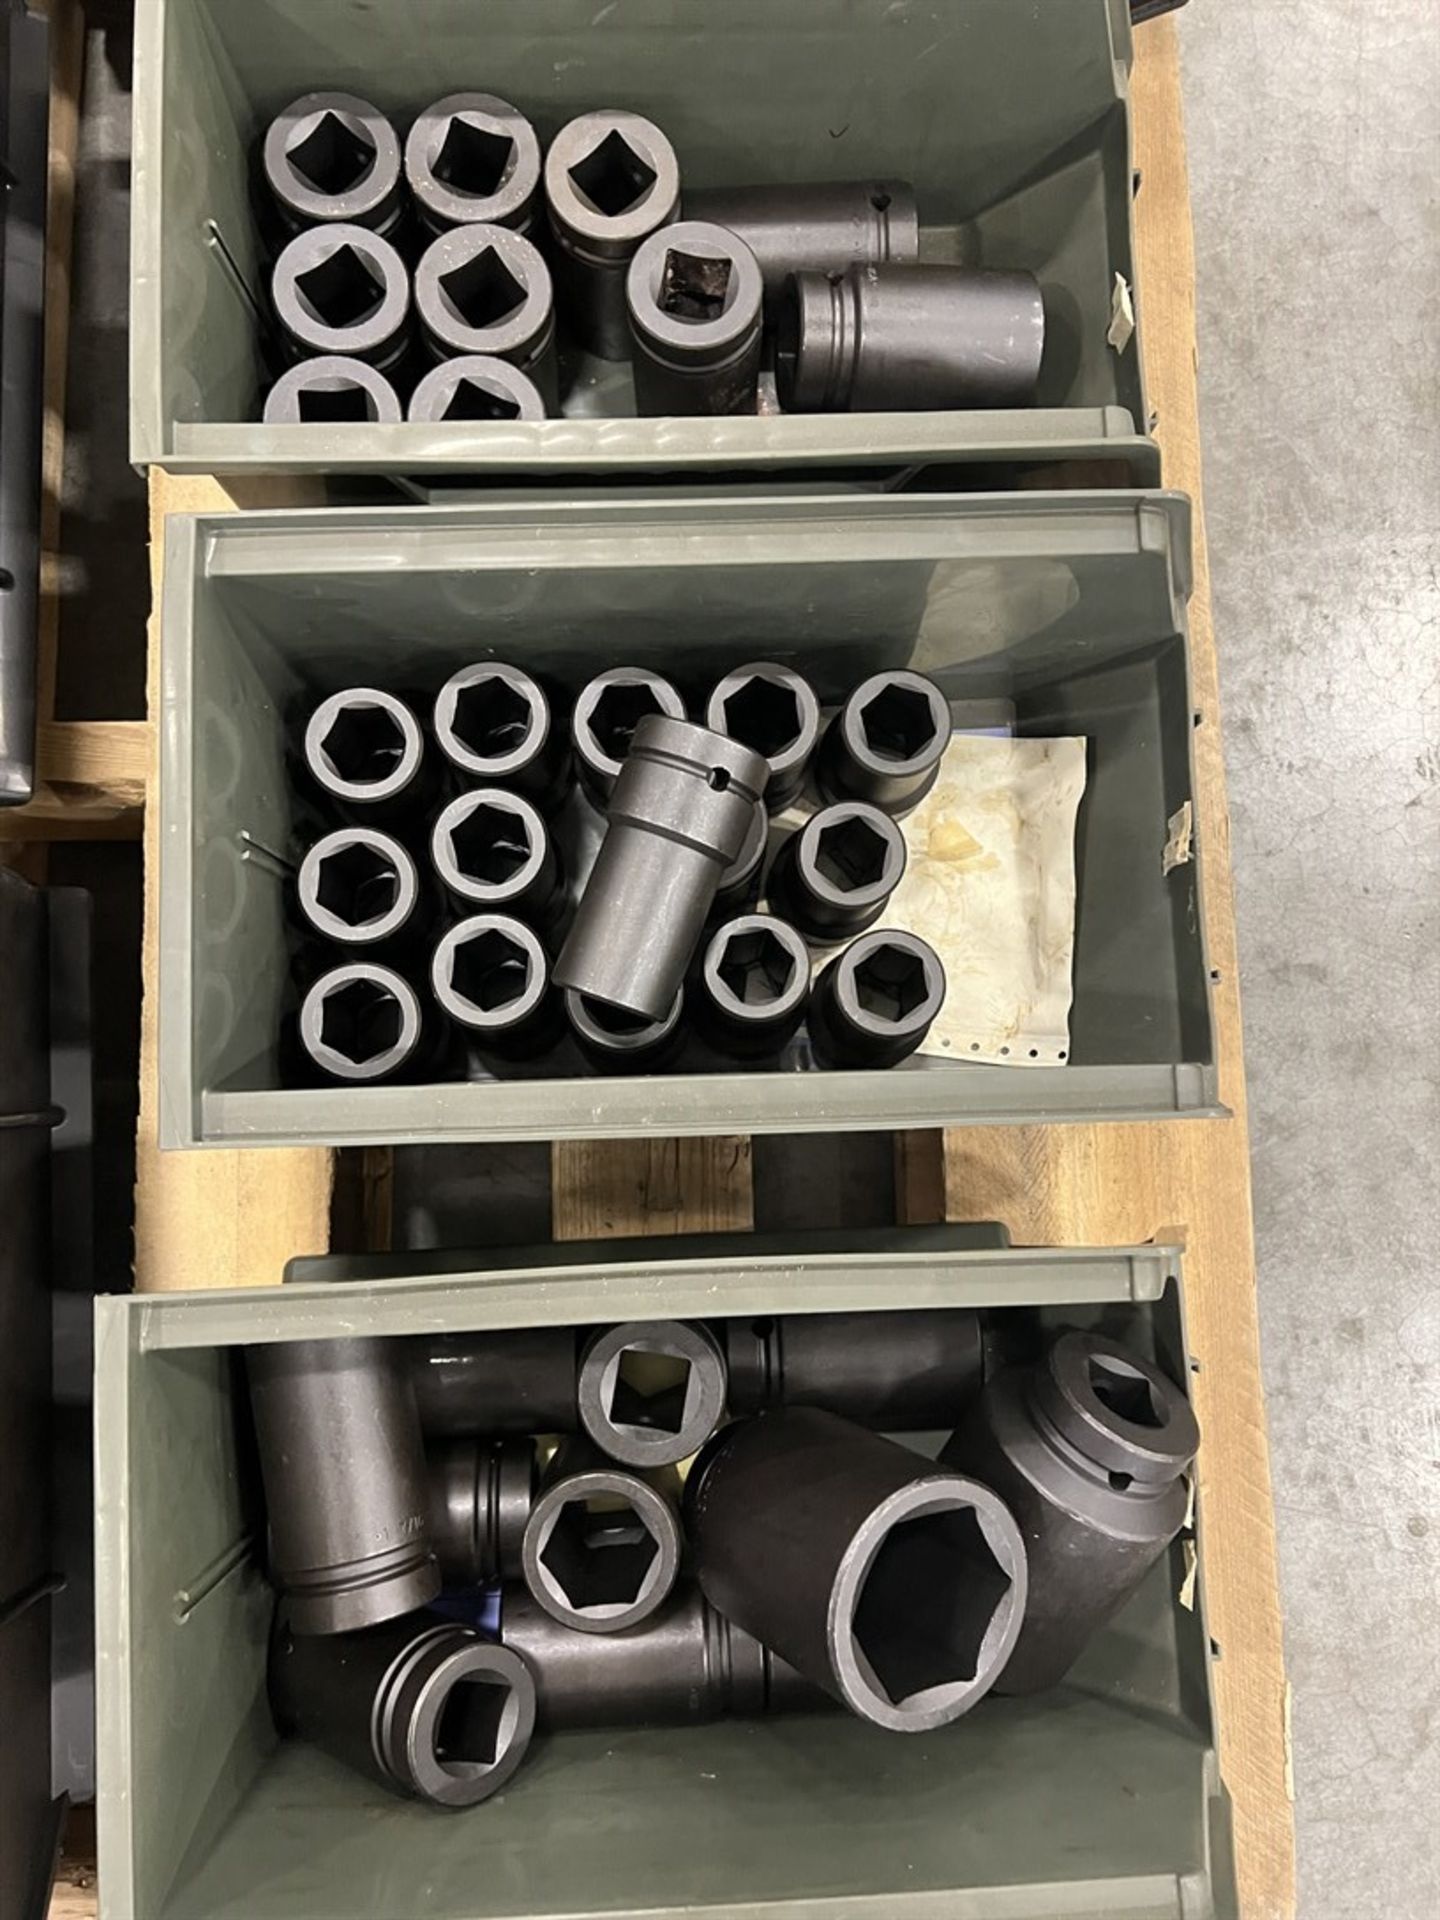 Pallet of 1" Drive Impact Sockets from 1-1/16" to 2-1/4" - Image 2 of 4